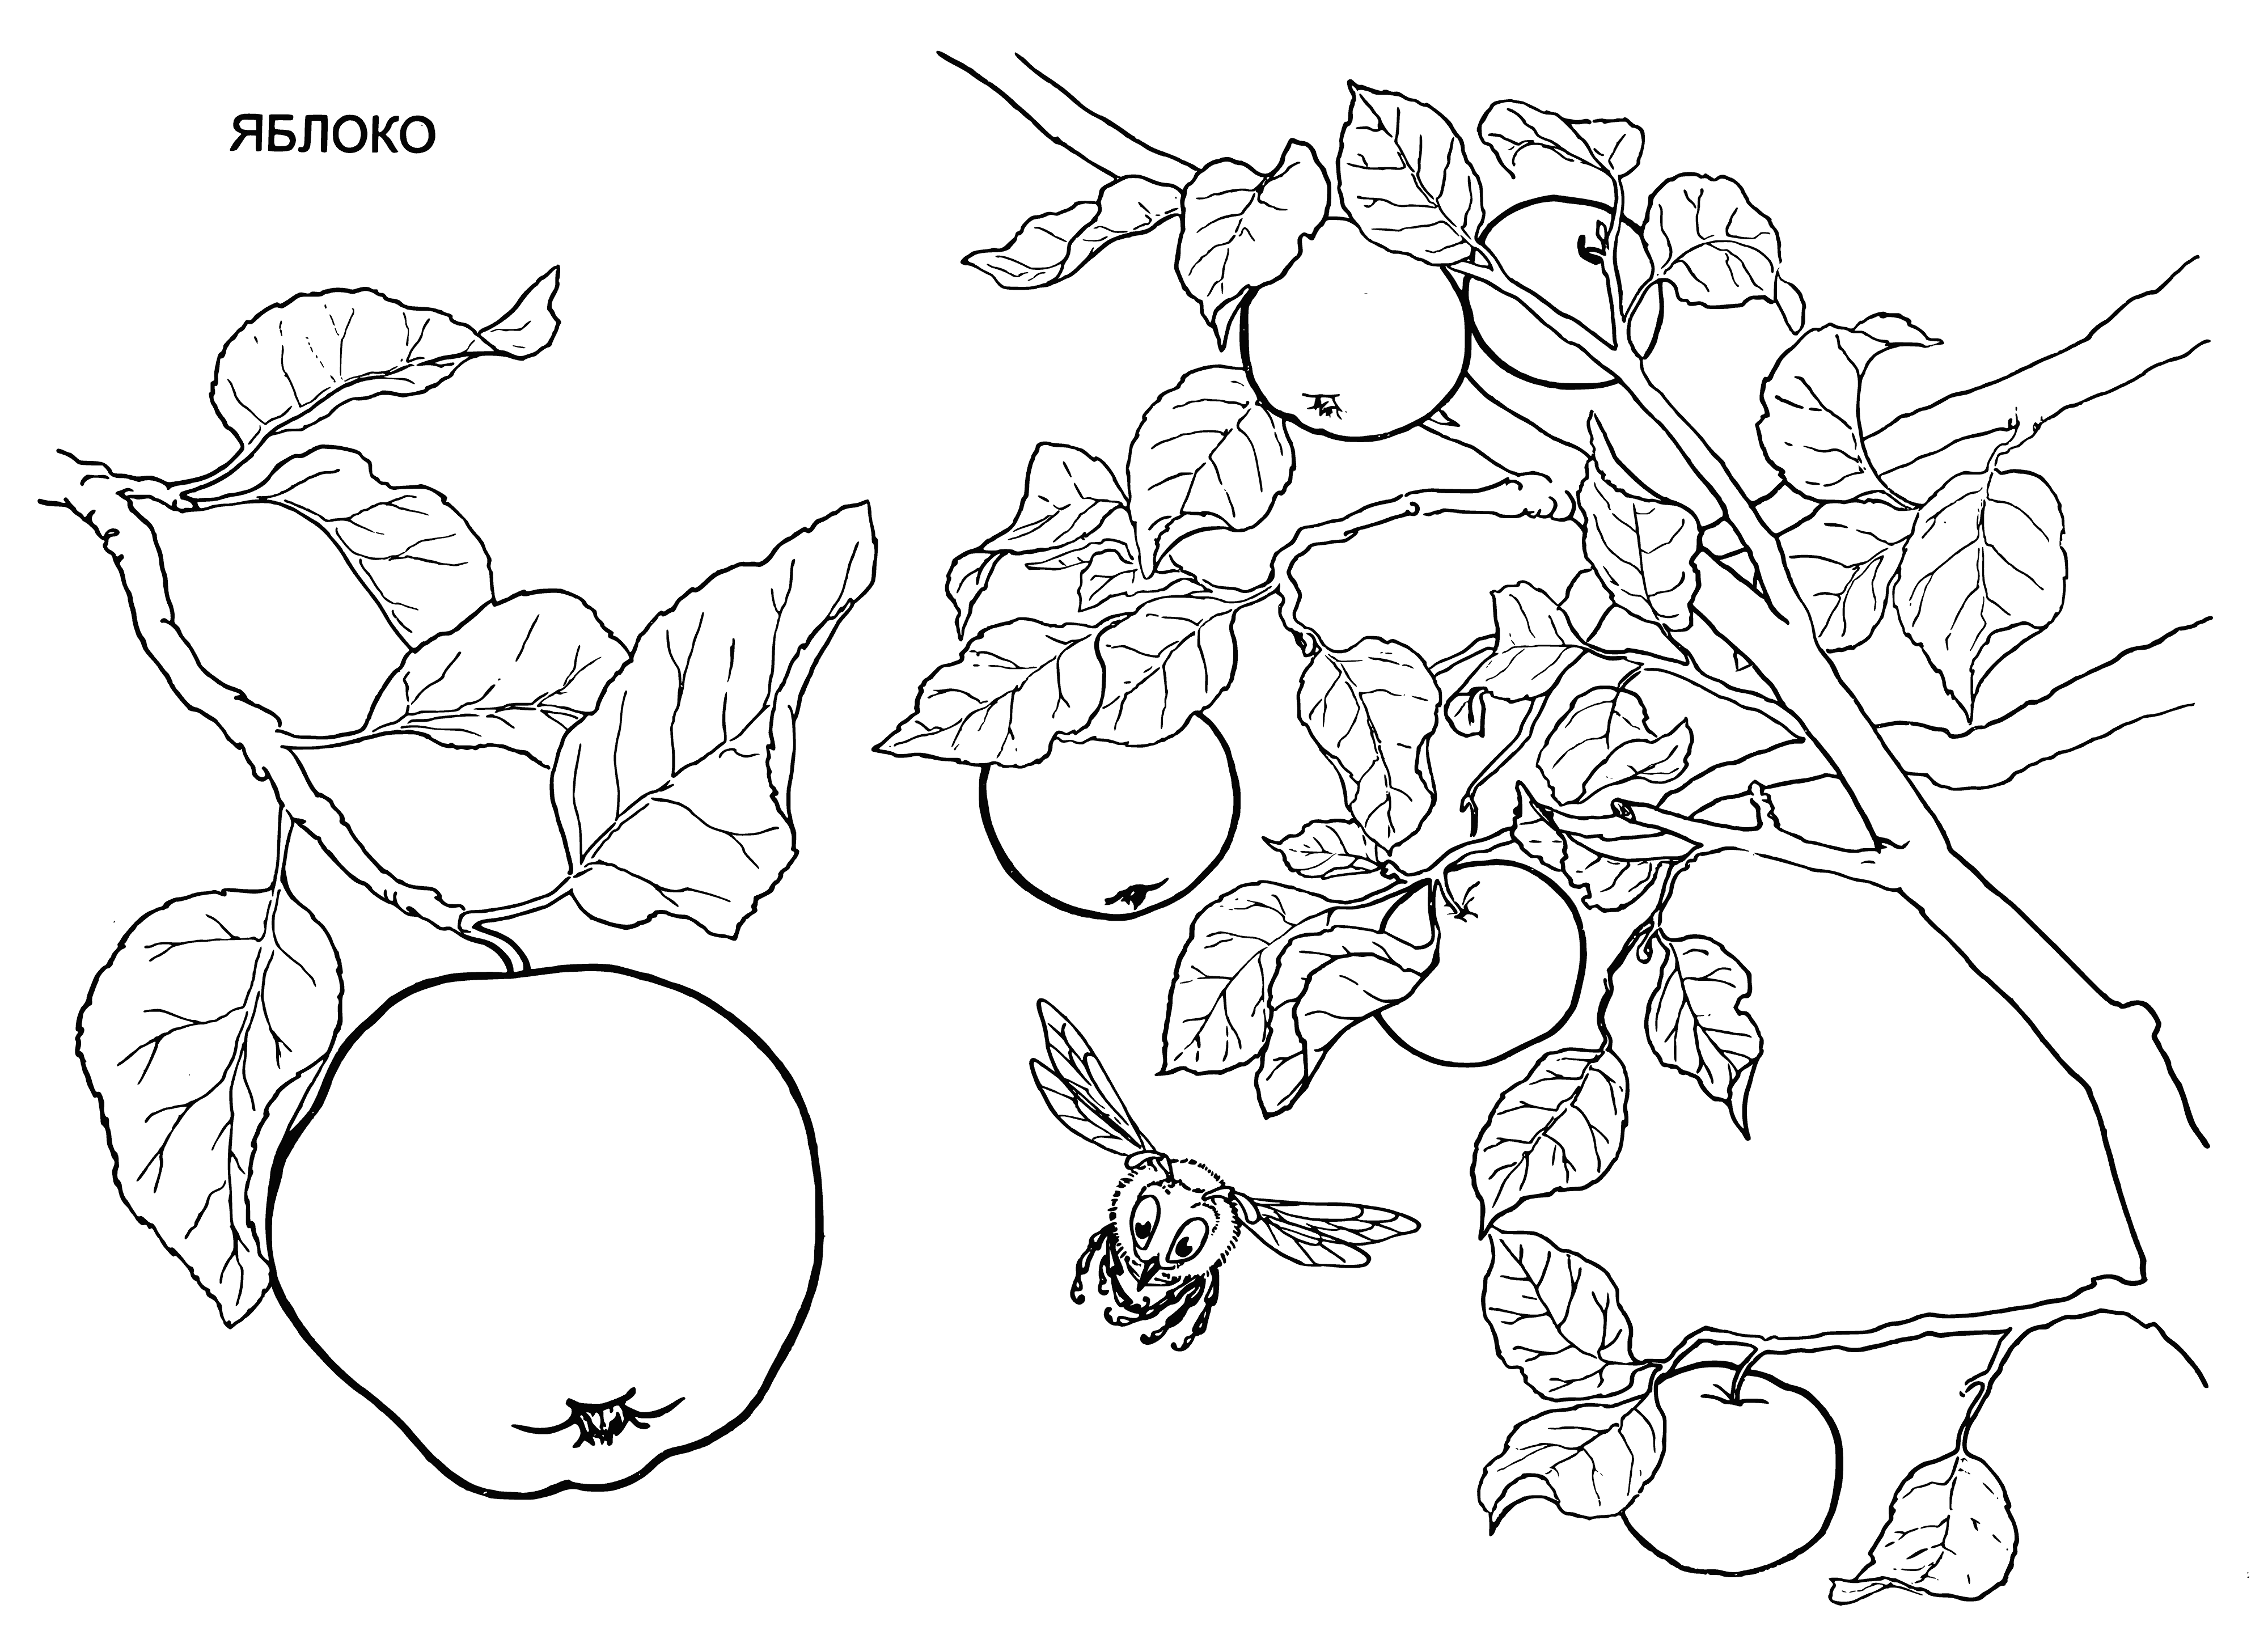 coloring page: 3 apples of 3 sizes & colors: smallest green, yellow in middle, & largest red.